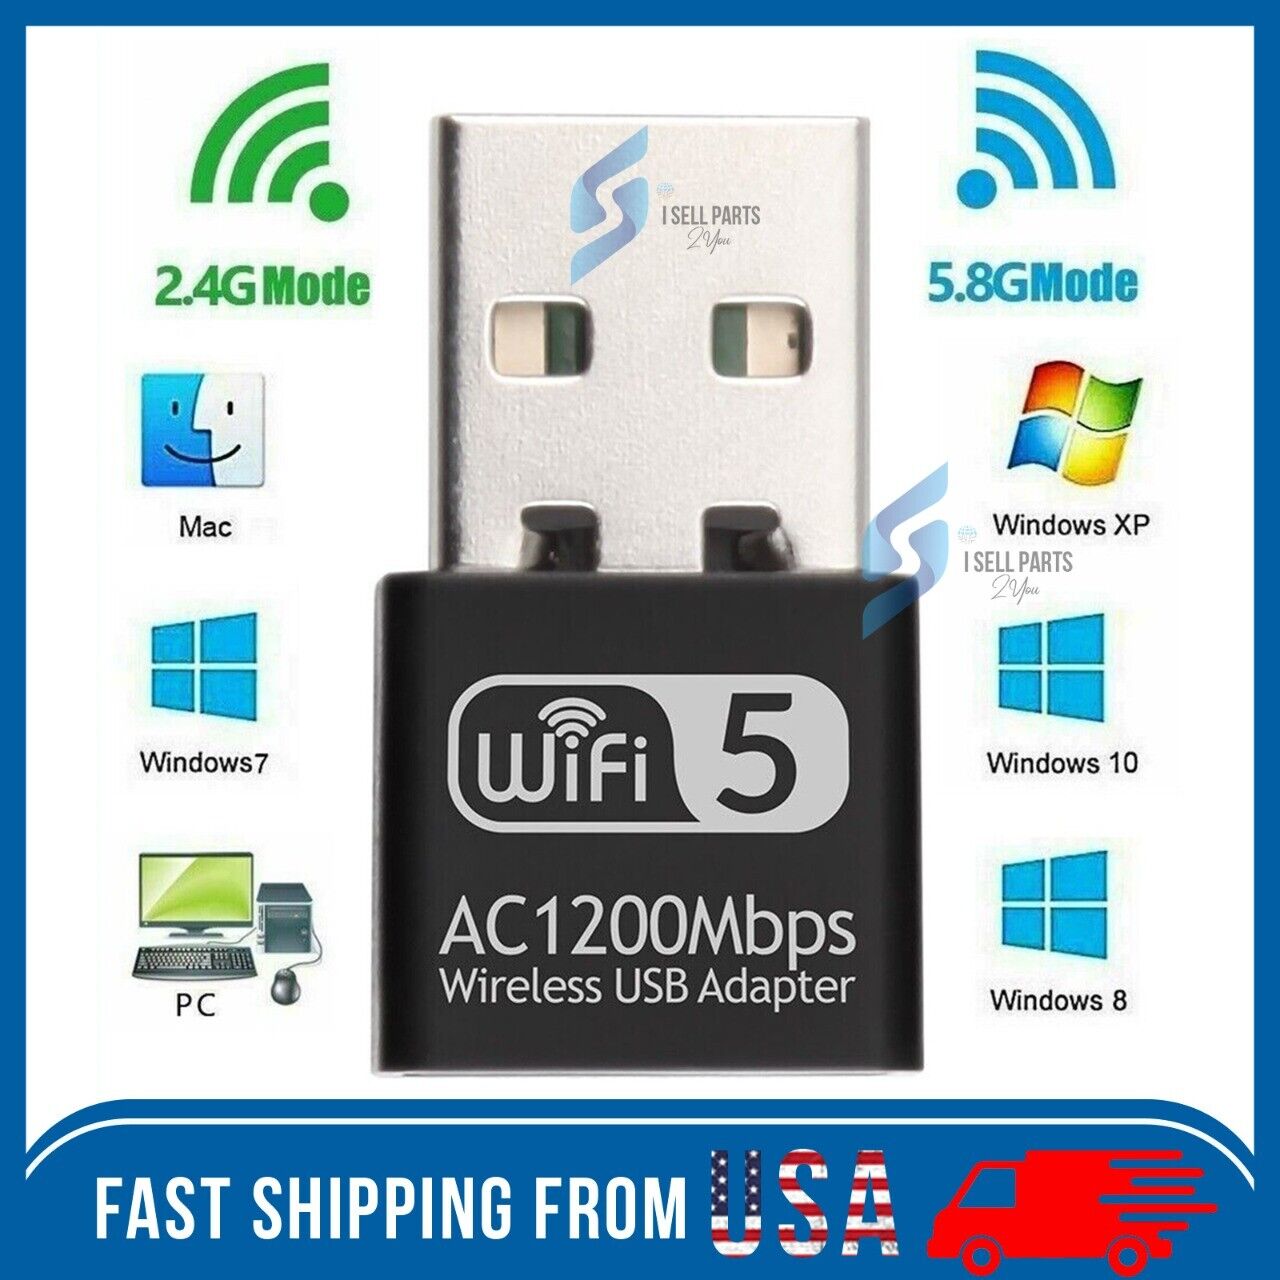 USB WiFi Wireless AC1200 Mbps Adapter Dongle USB 3.0 Network Card for PC Laptop